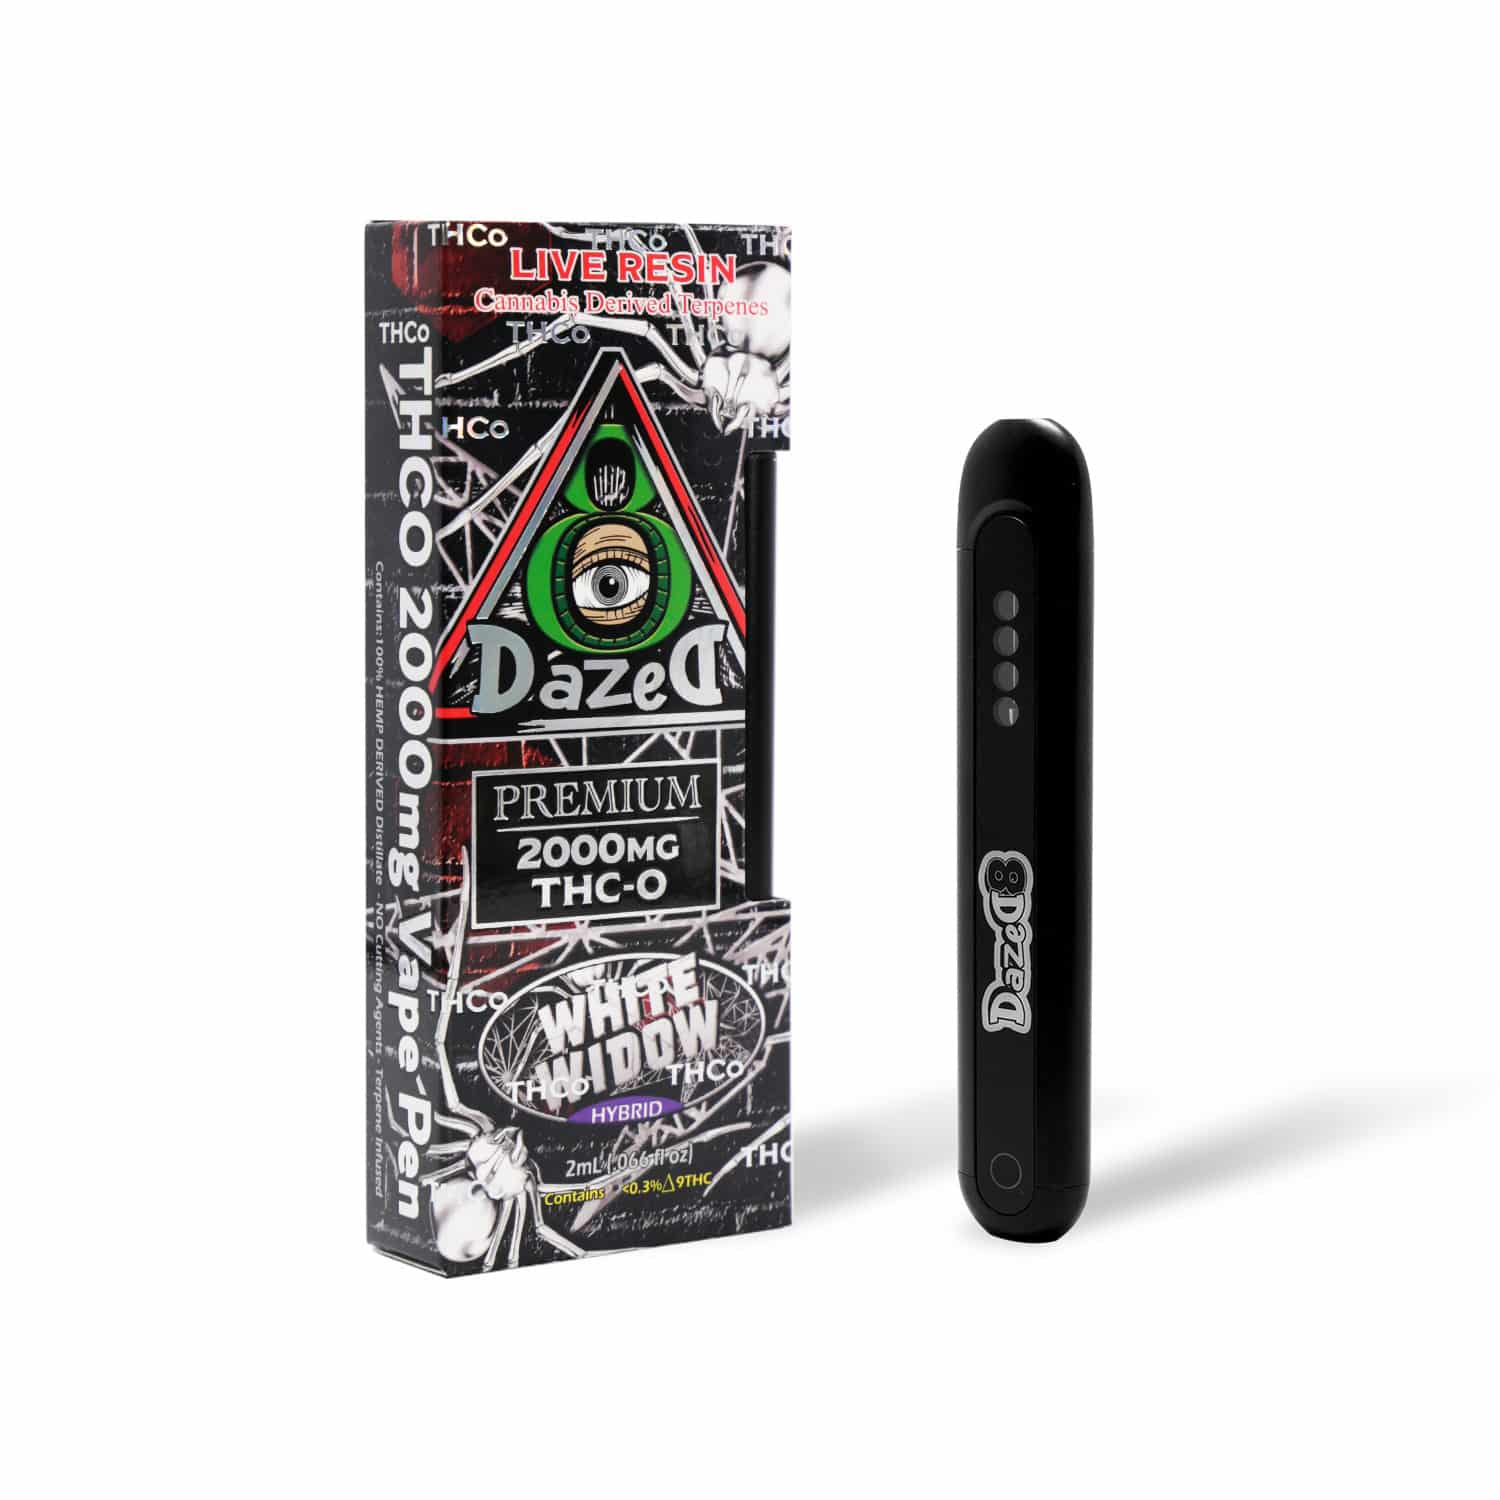 DazeD8 White Widow Live Resin THC-O Disposable (2g) Best Price